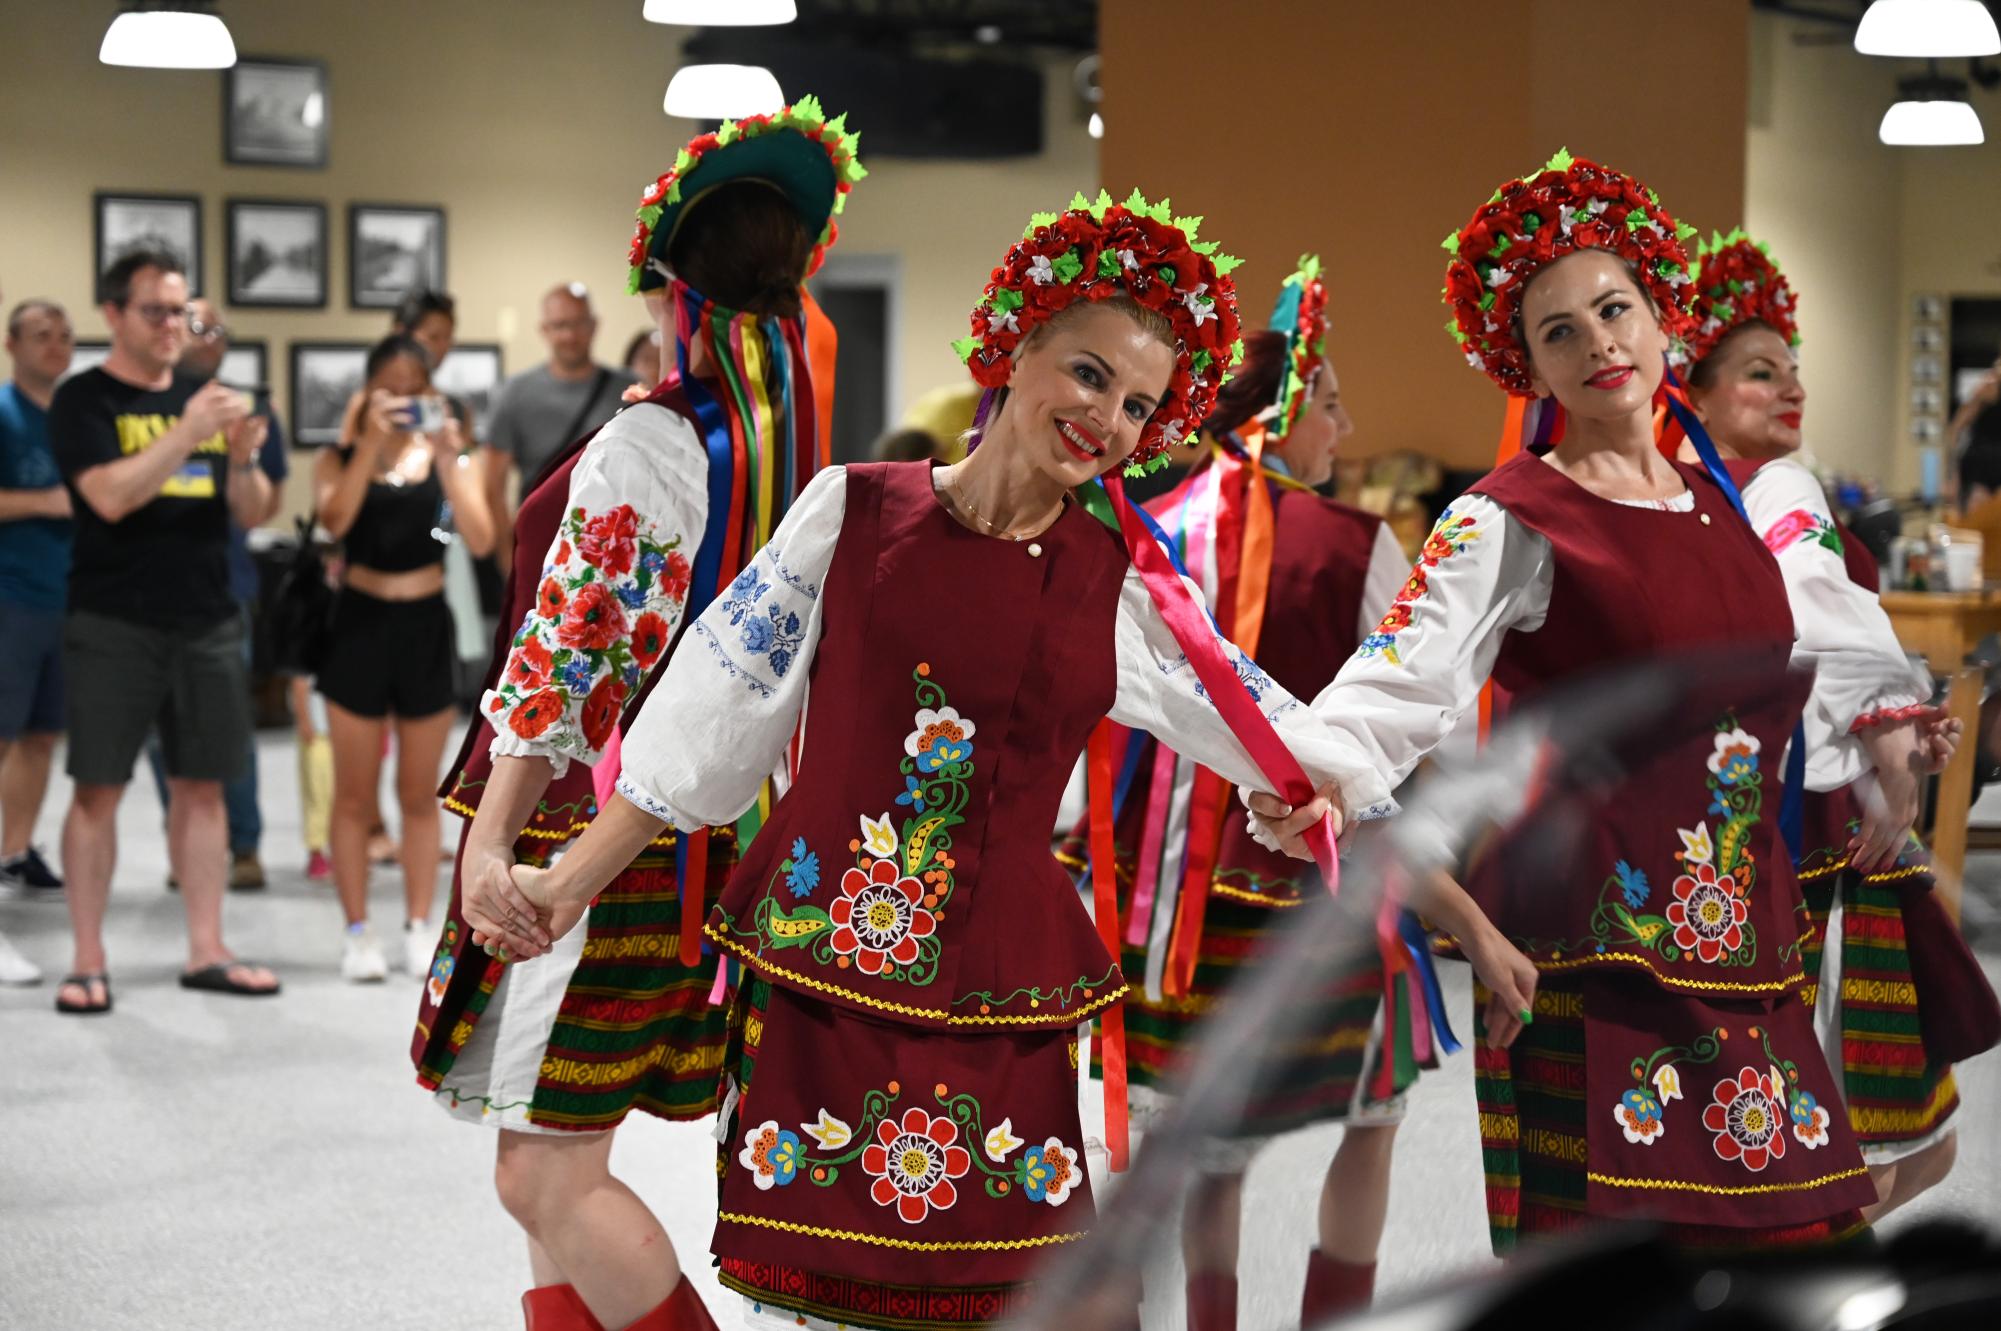 The Austin-based folk dance group Sonyashnyk, meaning sunflower in Ukrainian, performs a Ukrainian dance at the celebration of Ukrainian Independence Day 2023. Austin Ukrainians gathered at Saengerrunde Hall to celebrate Ukrainian independence alongside Ukrainian musicians and even U.S. Rep. Lloyd Doggett. It was great, Kate Voinova said. Despite these hard times, we gather together and we celebrated together, and I believe this is what community needed. Photo courtesy of Kate Voinova.